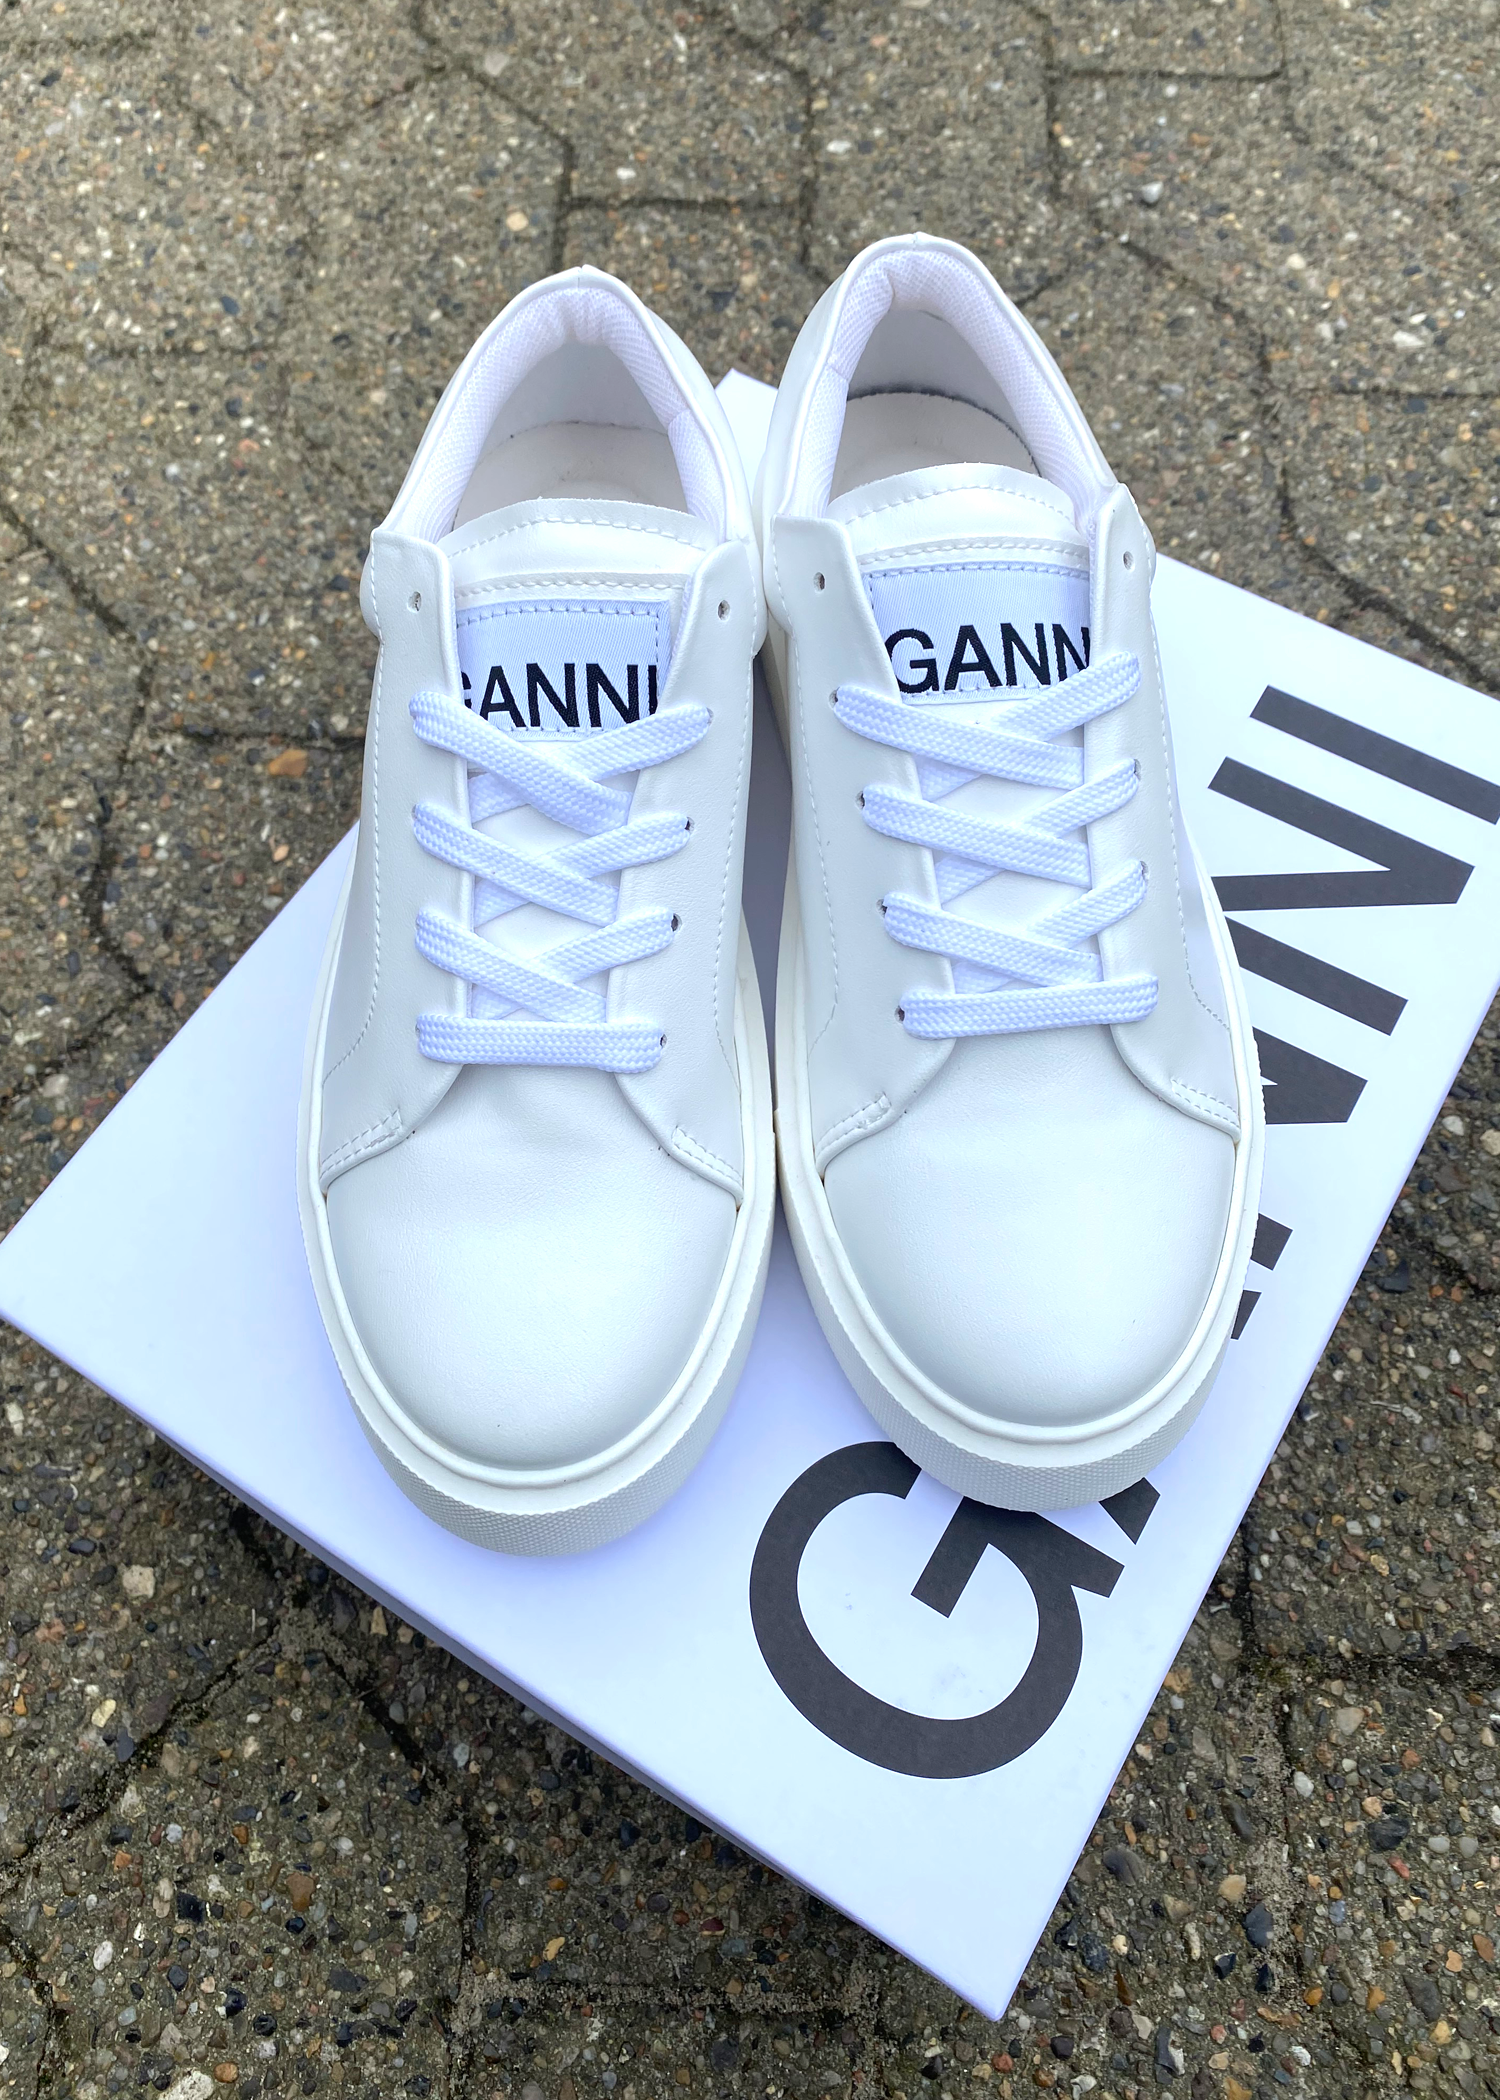 S1789 Mix Sneakers / Ganni / Anthon.dk